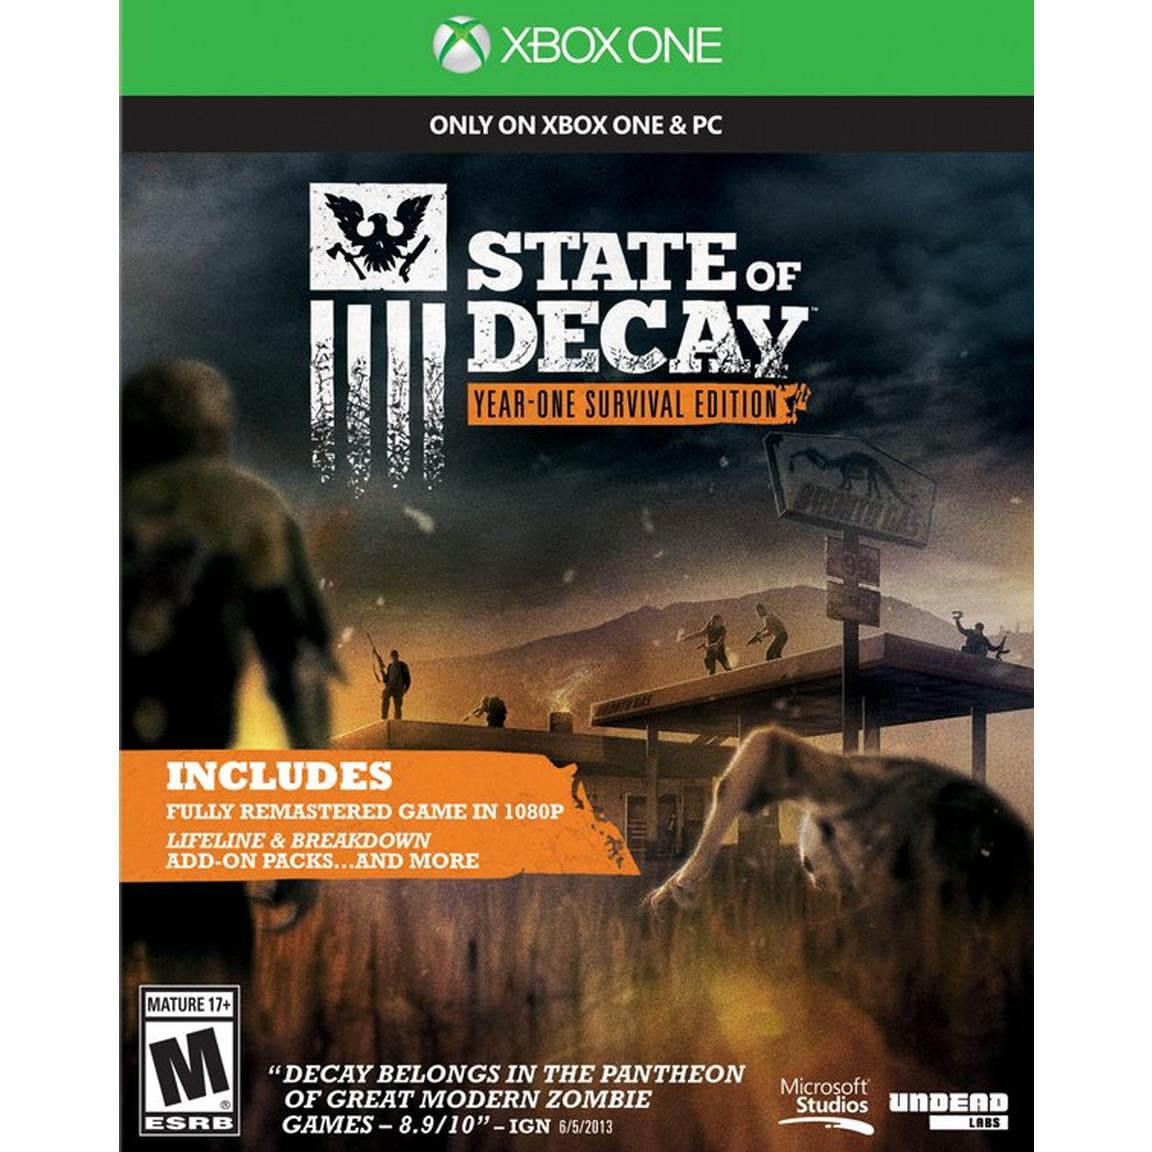 State of Decay: Breakdown DLC Coming This Month - IGN